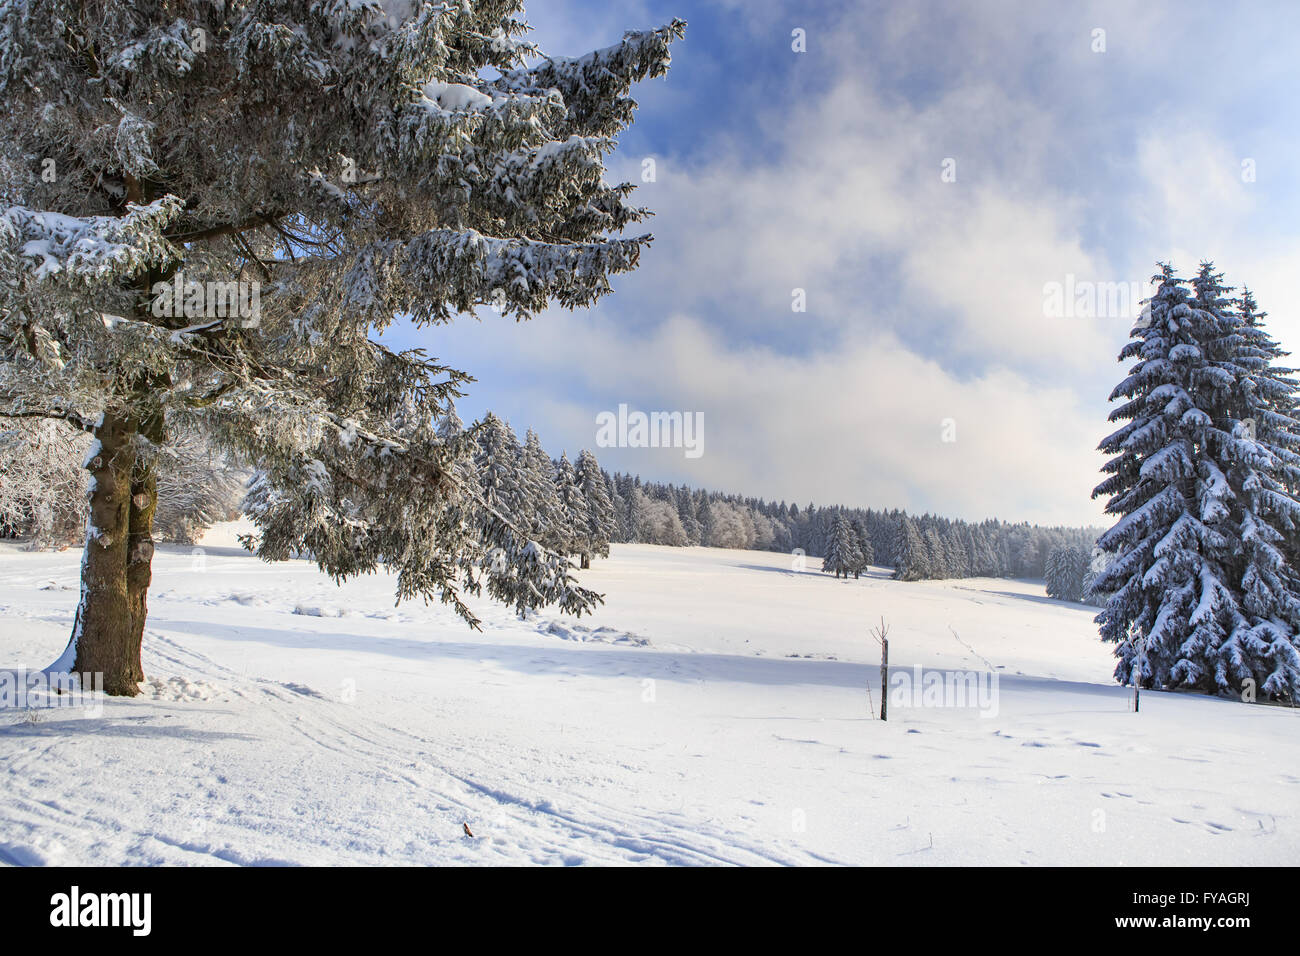 Wintry forest with skiing trail in Germany Stock Photo